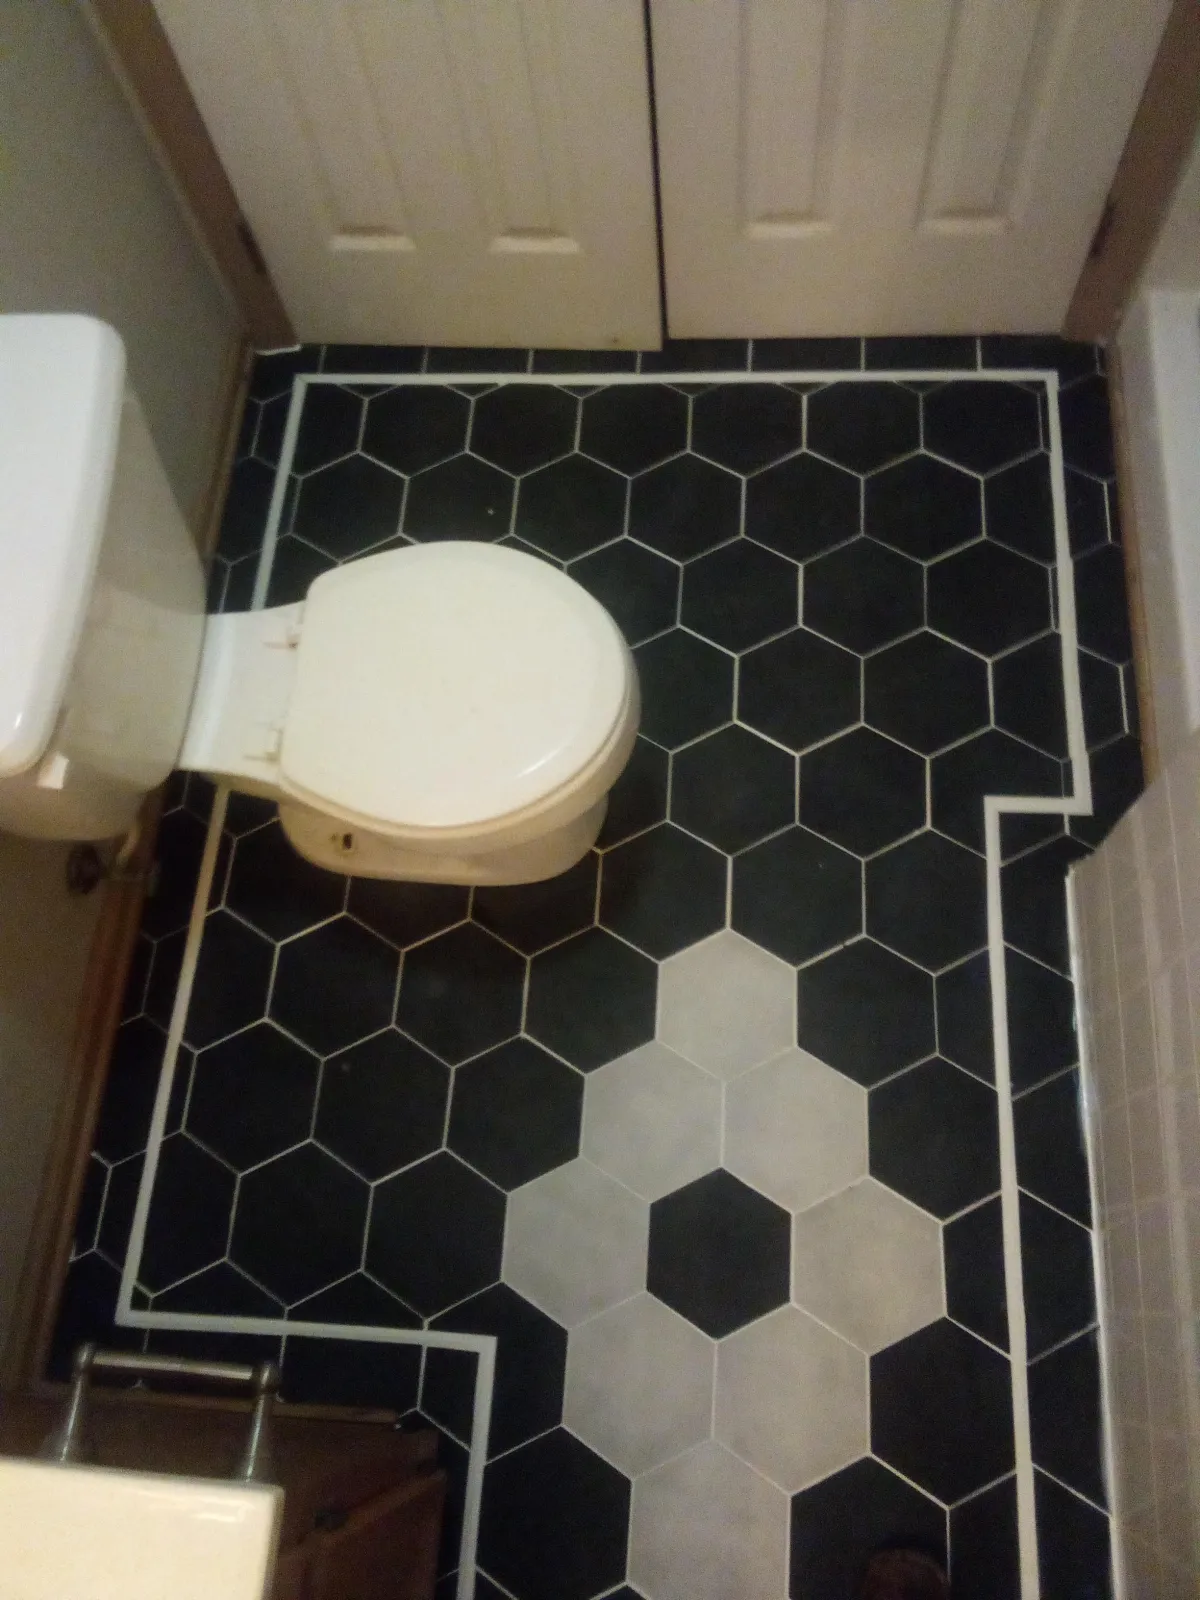 Exceptional bathroom tile remake by Hand in Hand Contracting, Dallas Fort Worth - Precision and artistry in remodel showcased